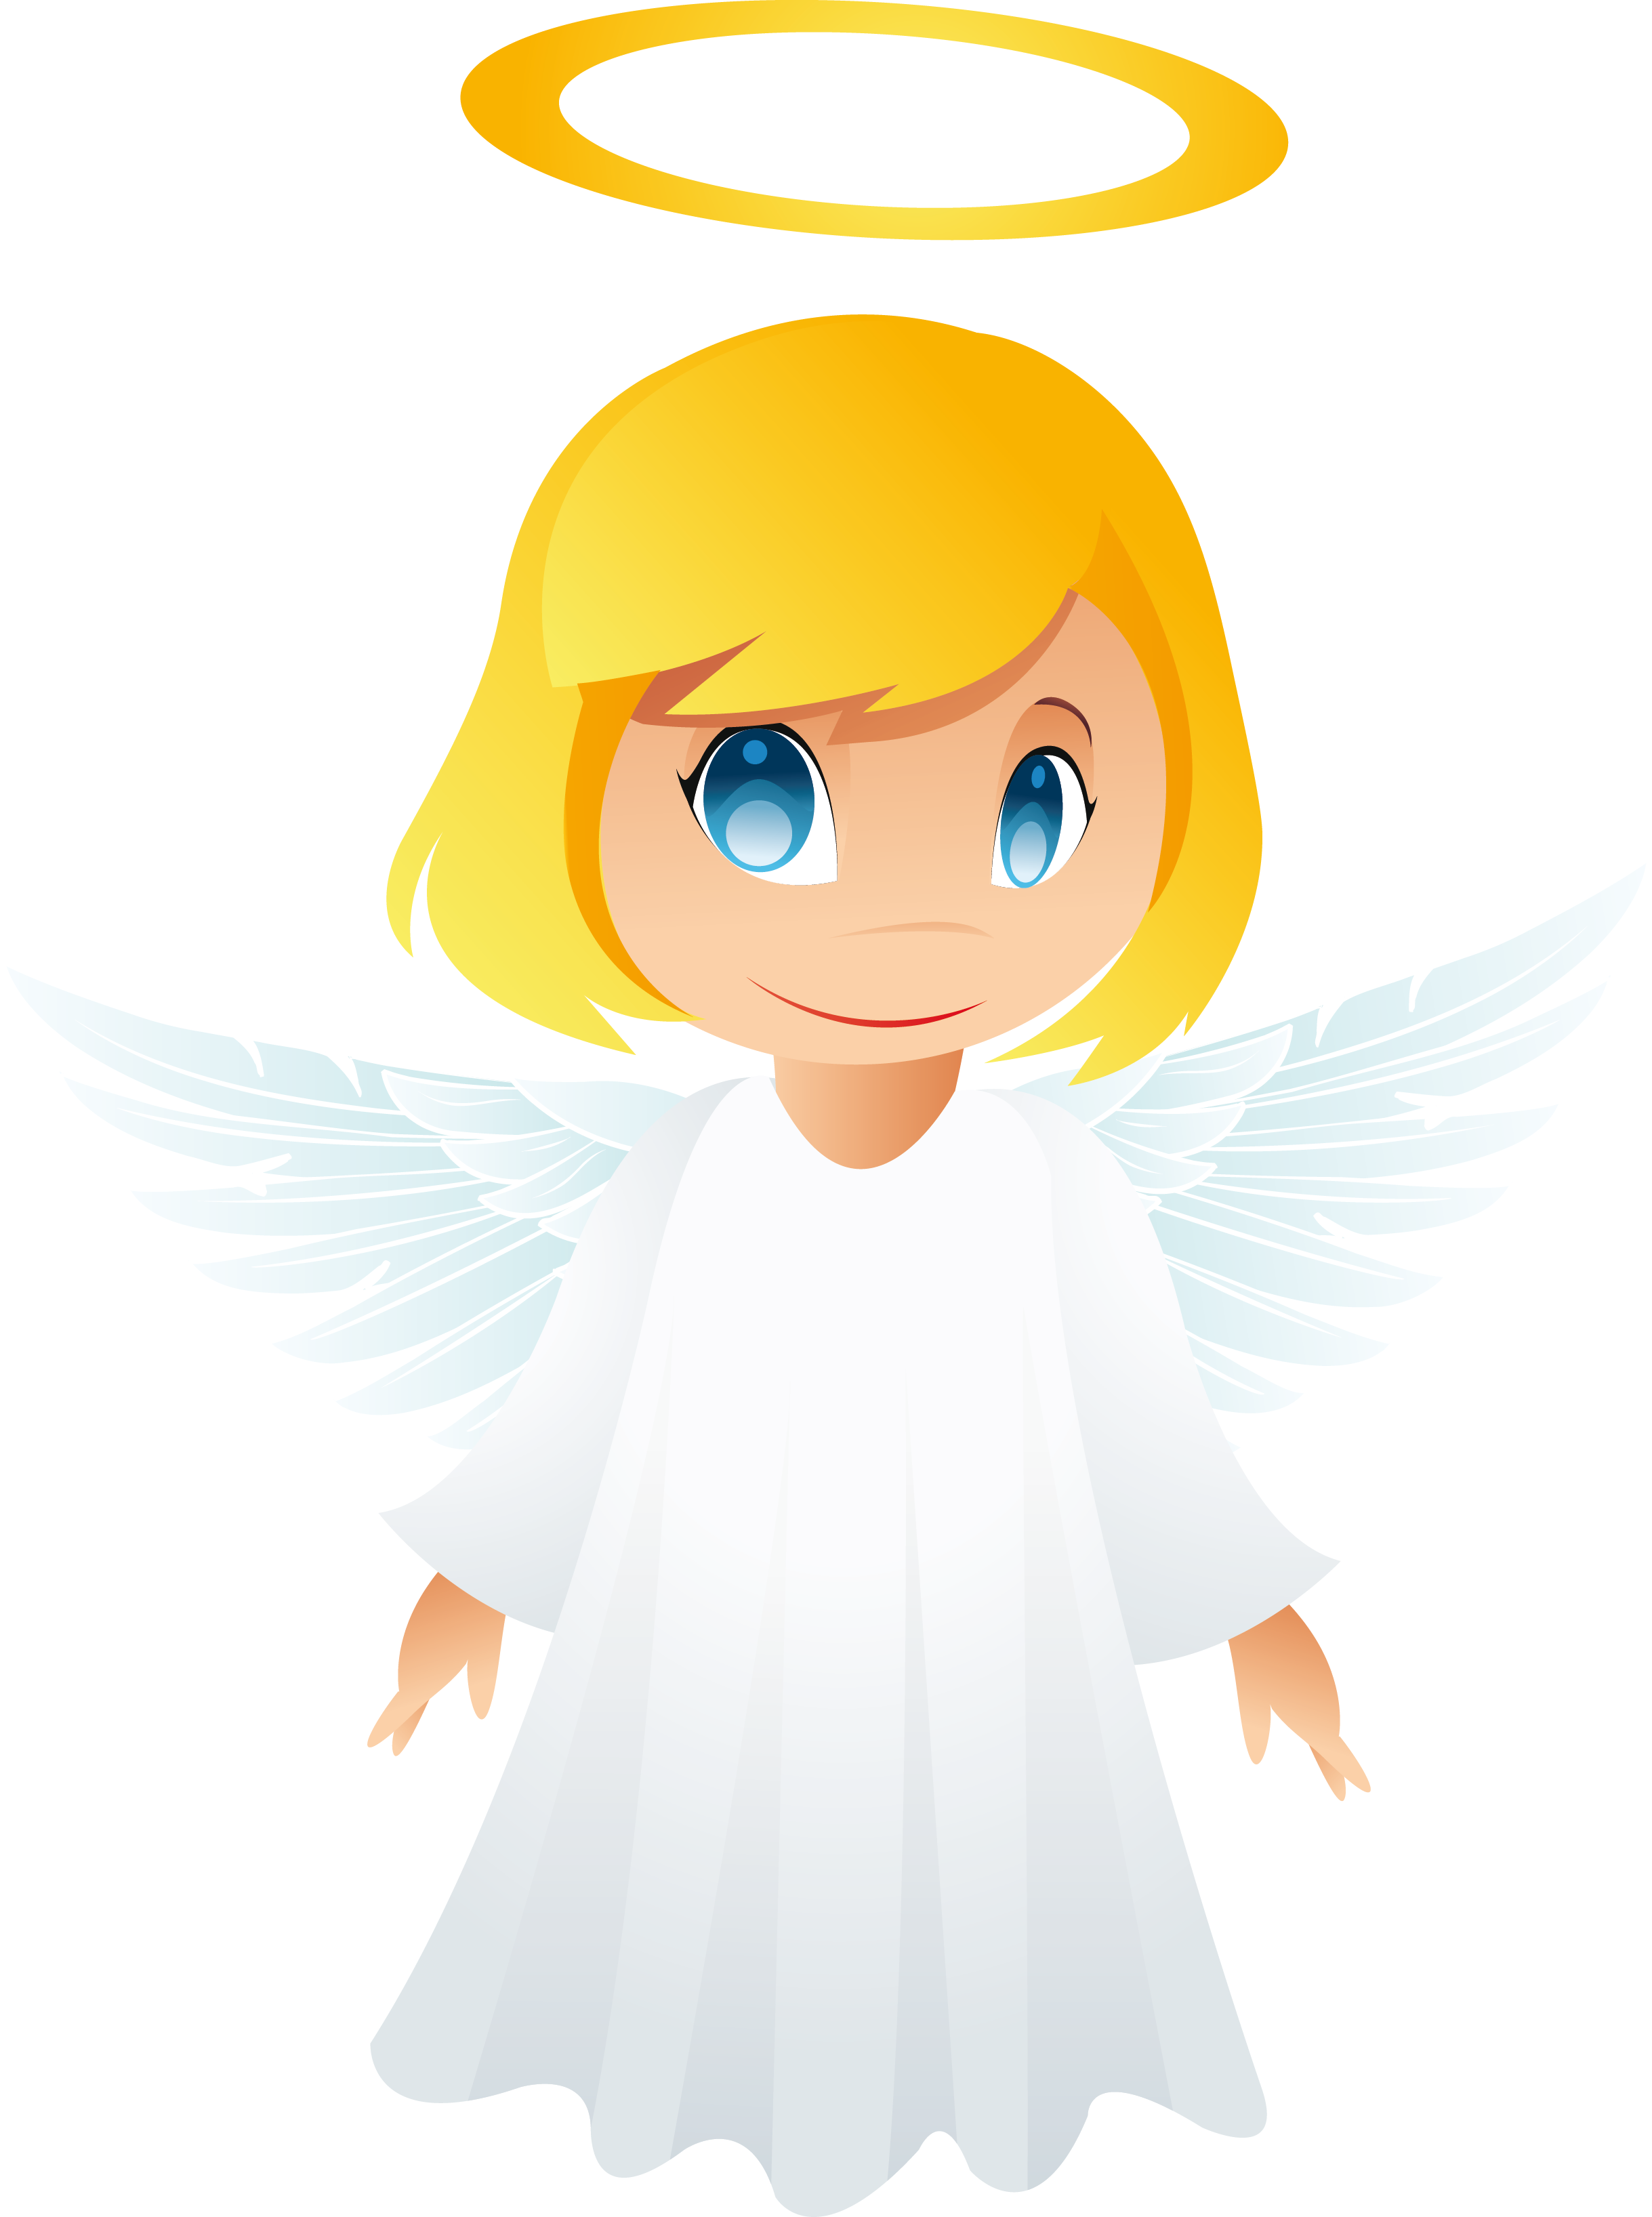 Angel clipart free graphics o - Clipart Angel